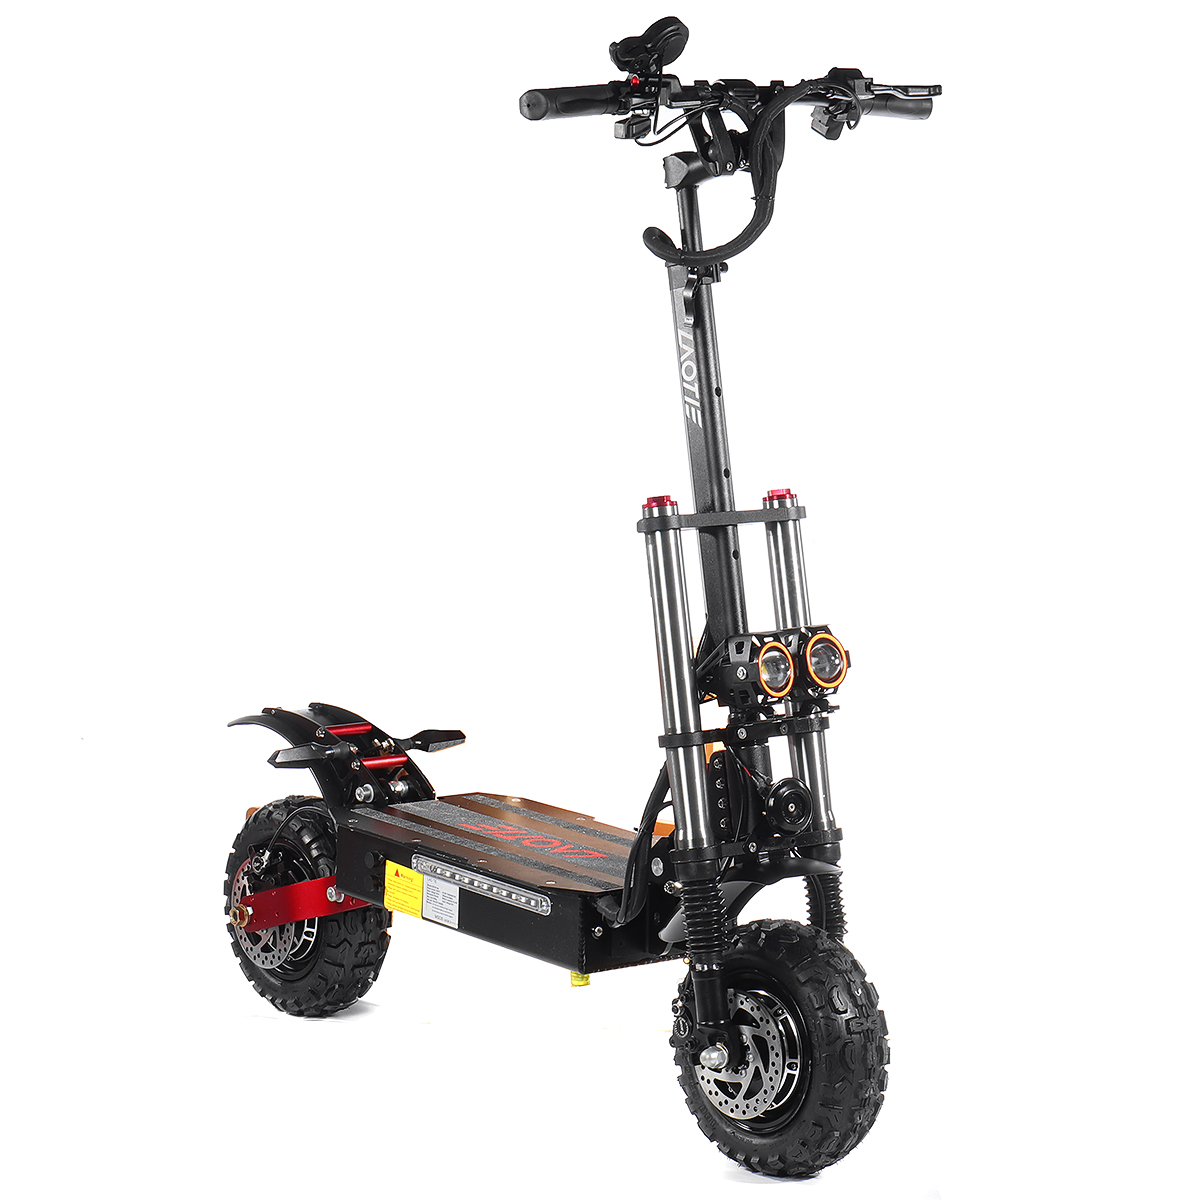 Find LAOTIEÂ® Ti30 Landbreaker 60V 38.4Ah 21700 Battery 5600W Dual Motor Foldable Electric Scooter 140km Mileage 200kg Max Load EU Plug for Sale on Gipsybee.com with cryptocurrencies